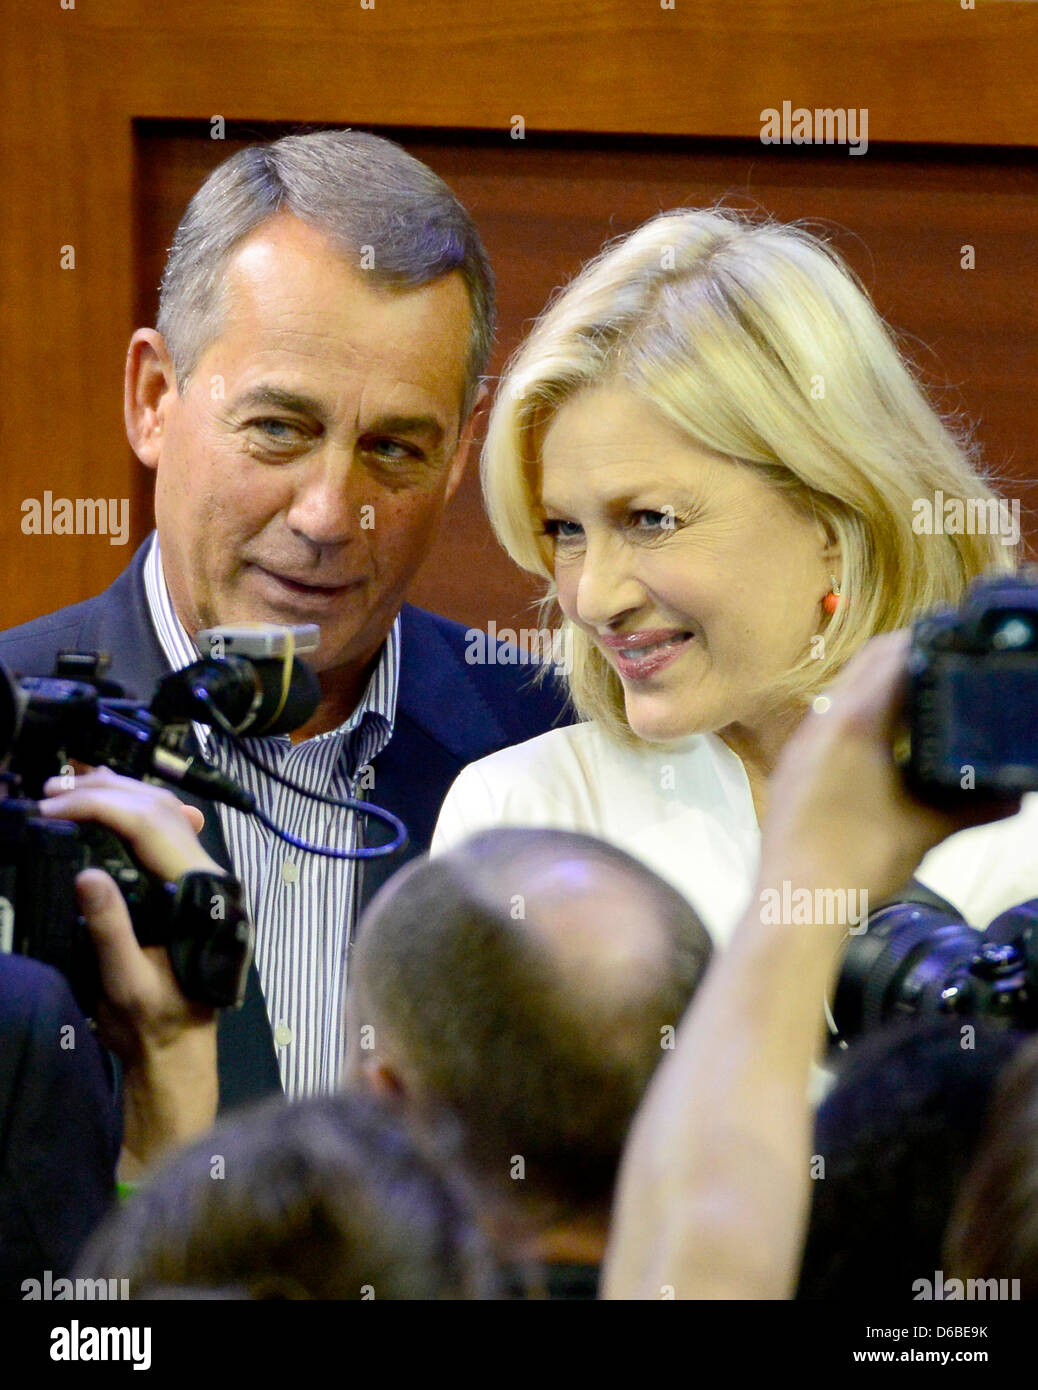 Speaker of the United States House of Representatives John Boehner (Republican of Ohio) poses for a photo with ABC News Anchor Diane Sawyer prior to participating in a sound check from the podium of the 2012 Republican National Convention prior to the start of proceedings in Tampa Bay, Florida on Monday, August 27, 2012..Credit: Ron Sachs / CNP.(RESTRICTION: NO New York or New Jers Stock Photo